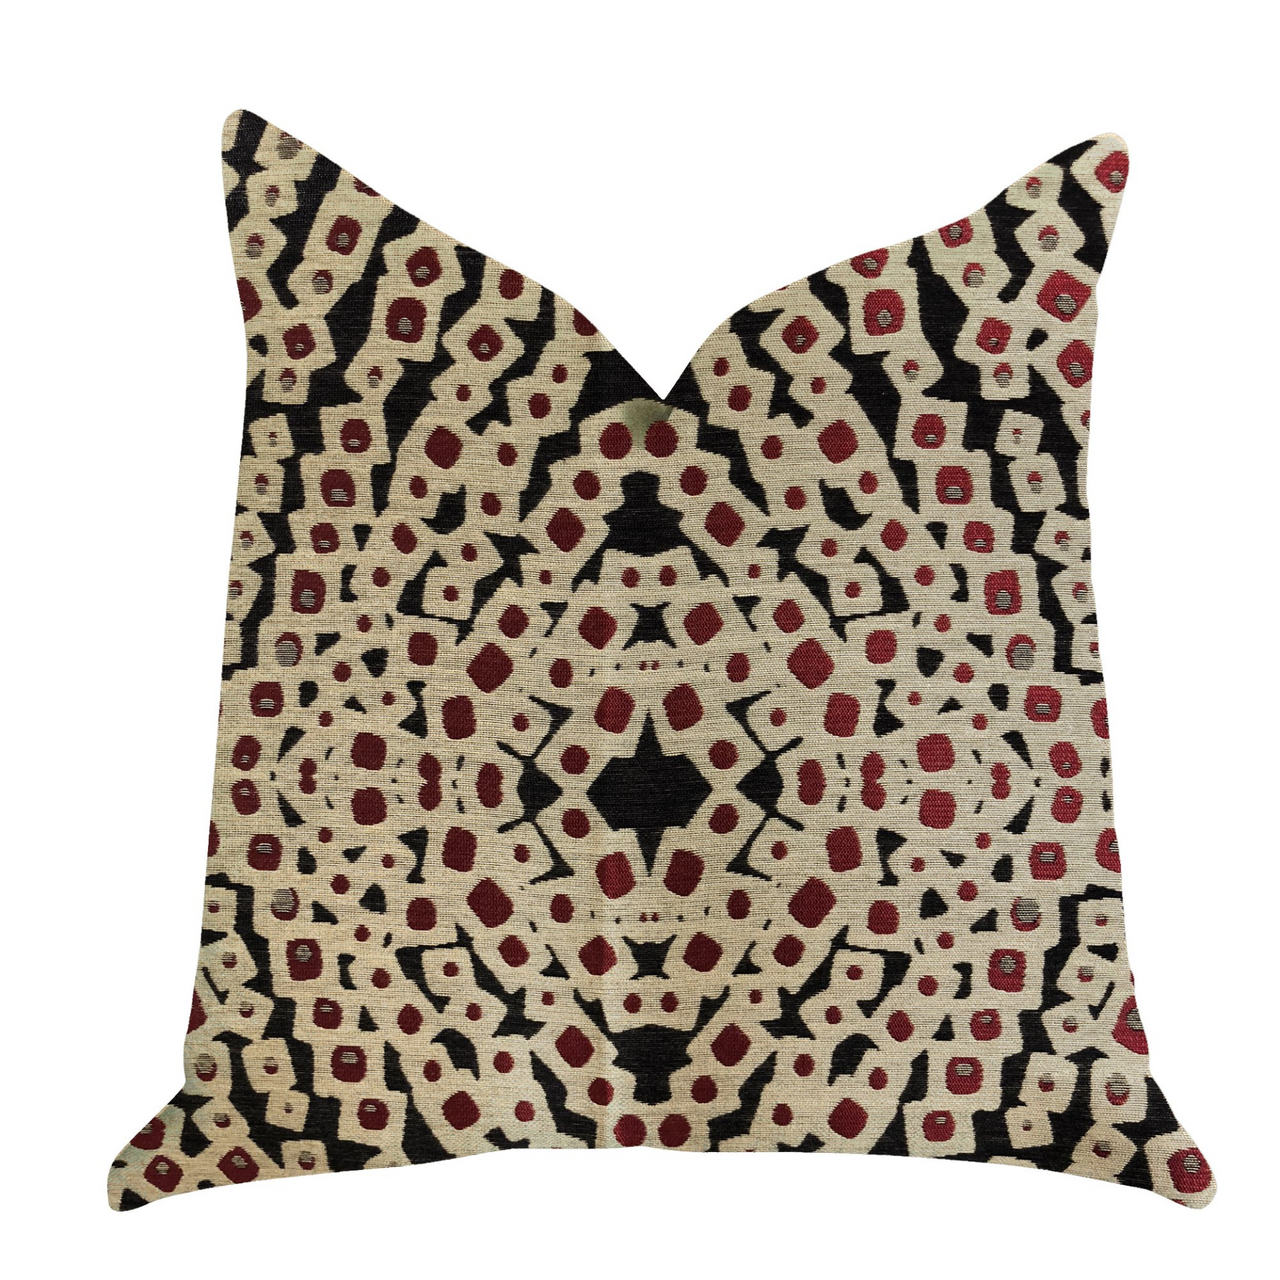 Scarlet Gem Luxury Throw Pillow in Red and Black